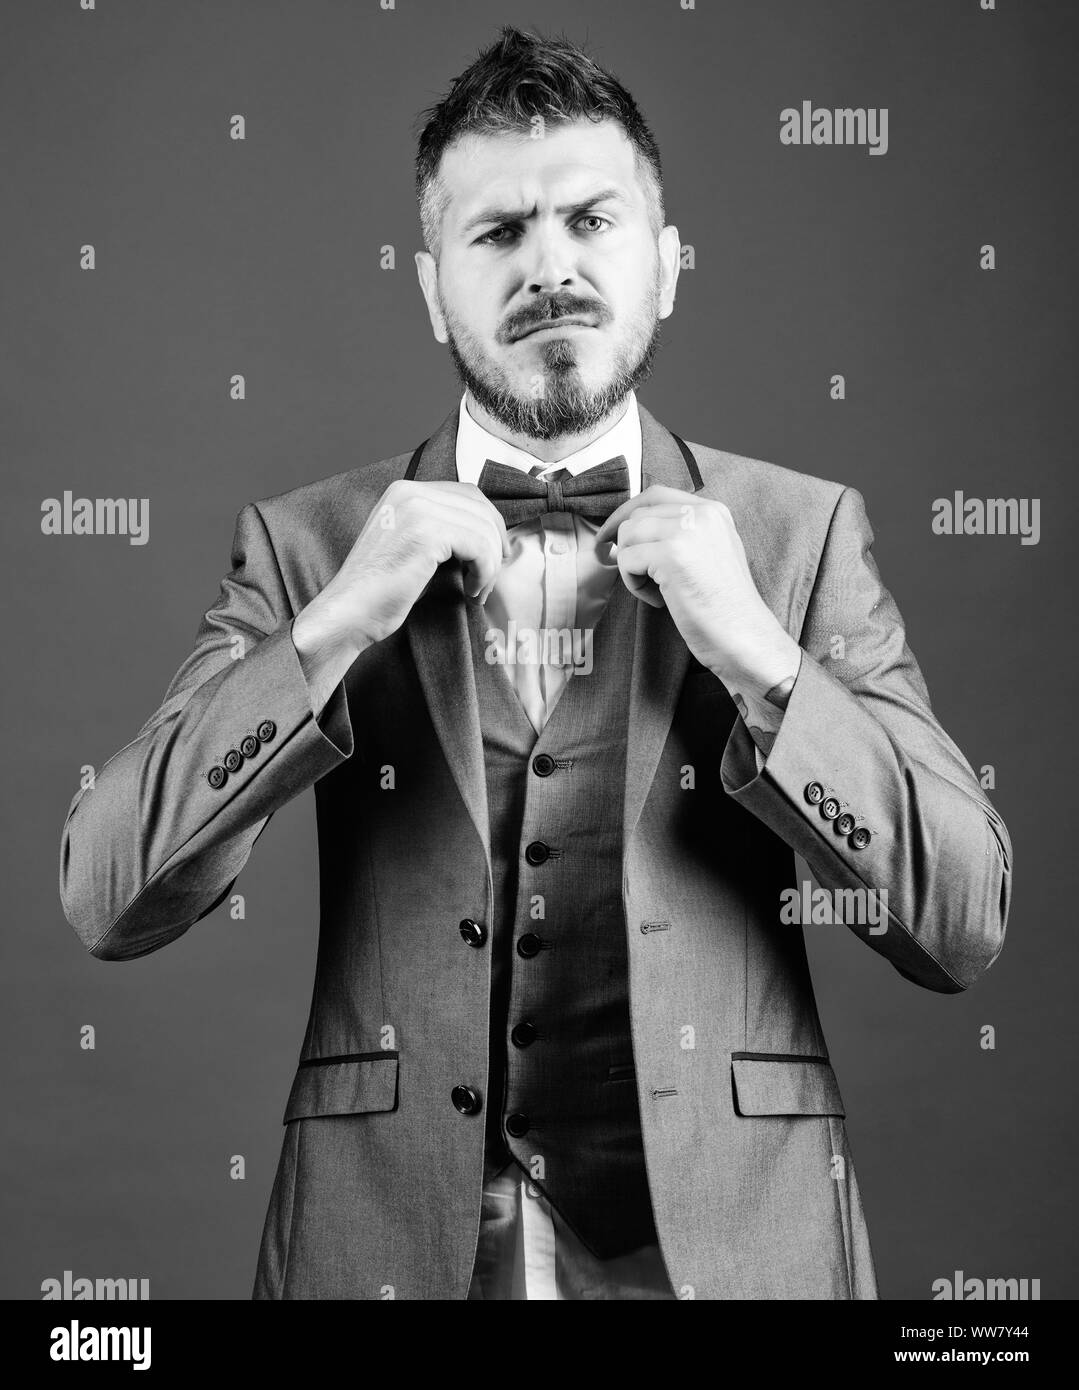 Well groomed man with beard in formal suit jacket. Male fashion and aesthetic. Businessman formal outfit. Classic style aesthetic. Perfect suit fit him. Menswear shop. Man adjust suit with bow tie. Stock Photo